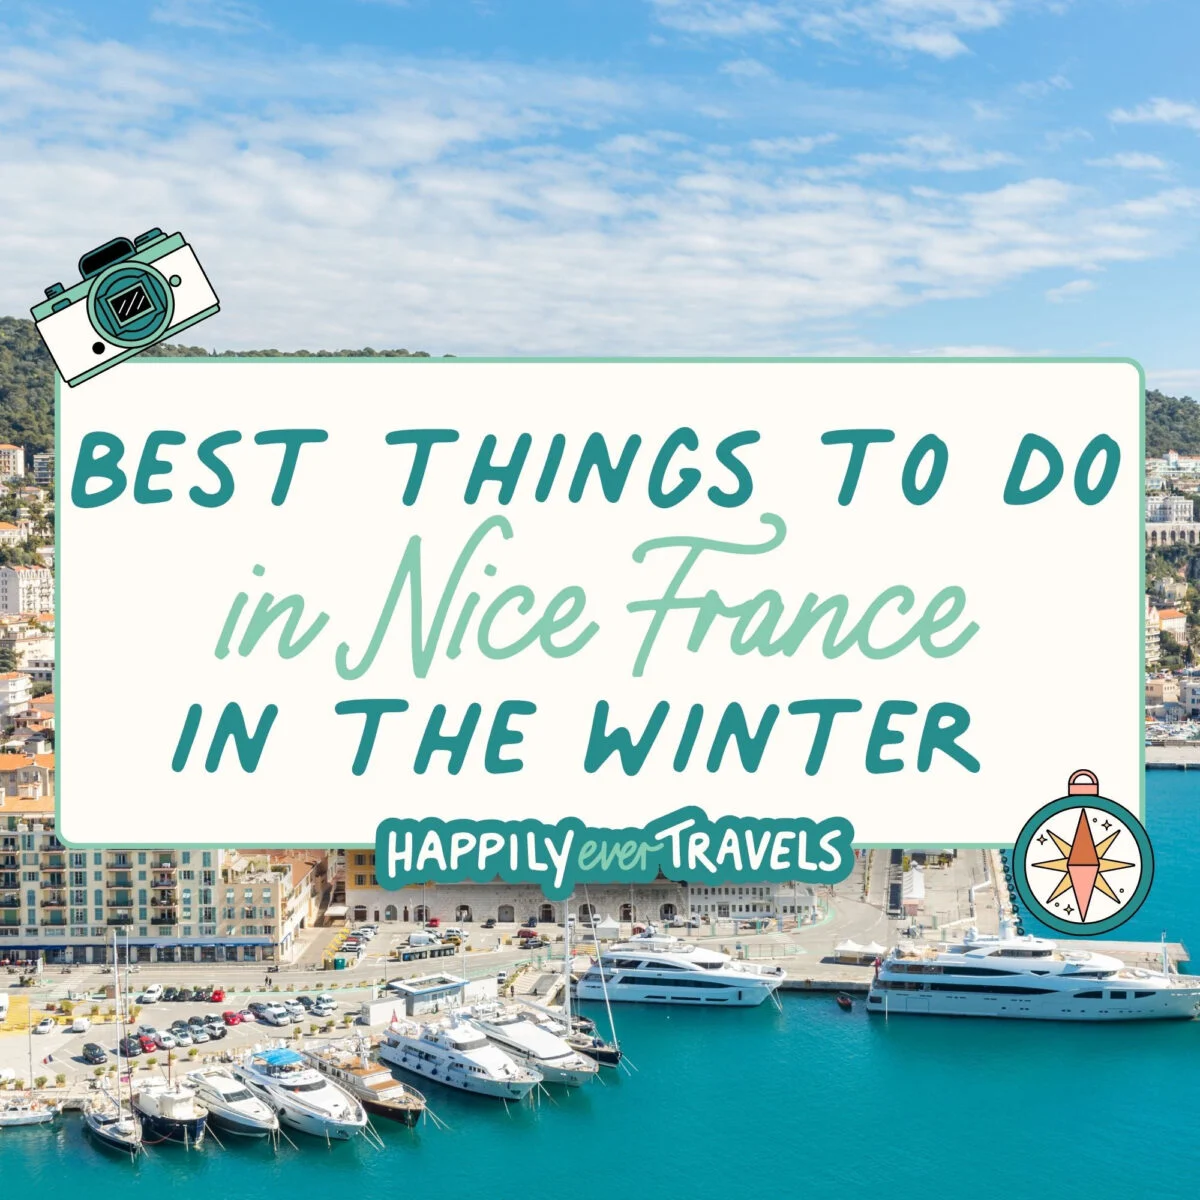 18 Best Things to Do in Nice France in the Winter (From a Local!)